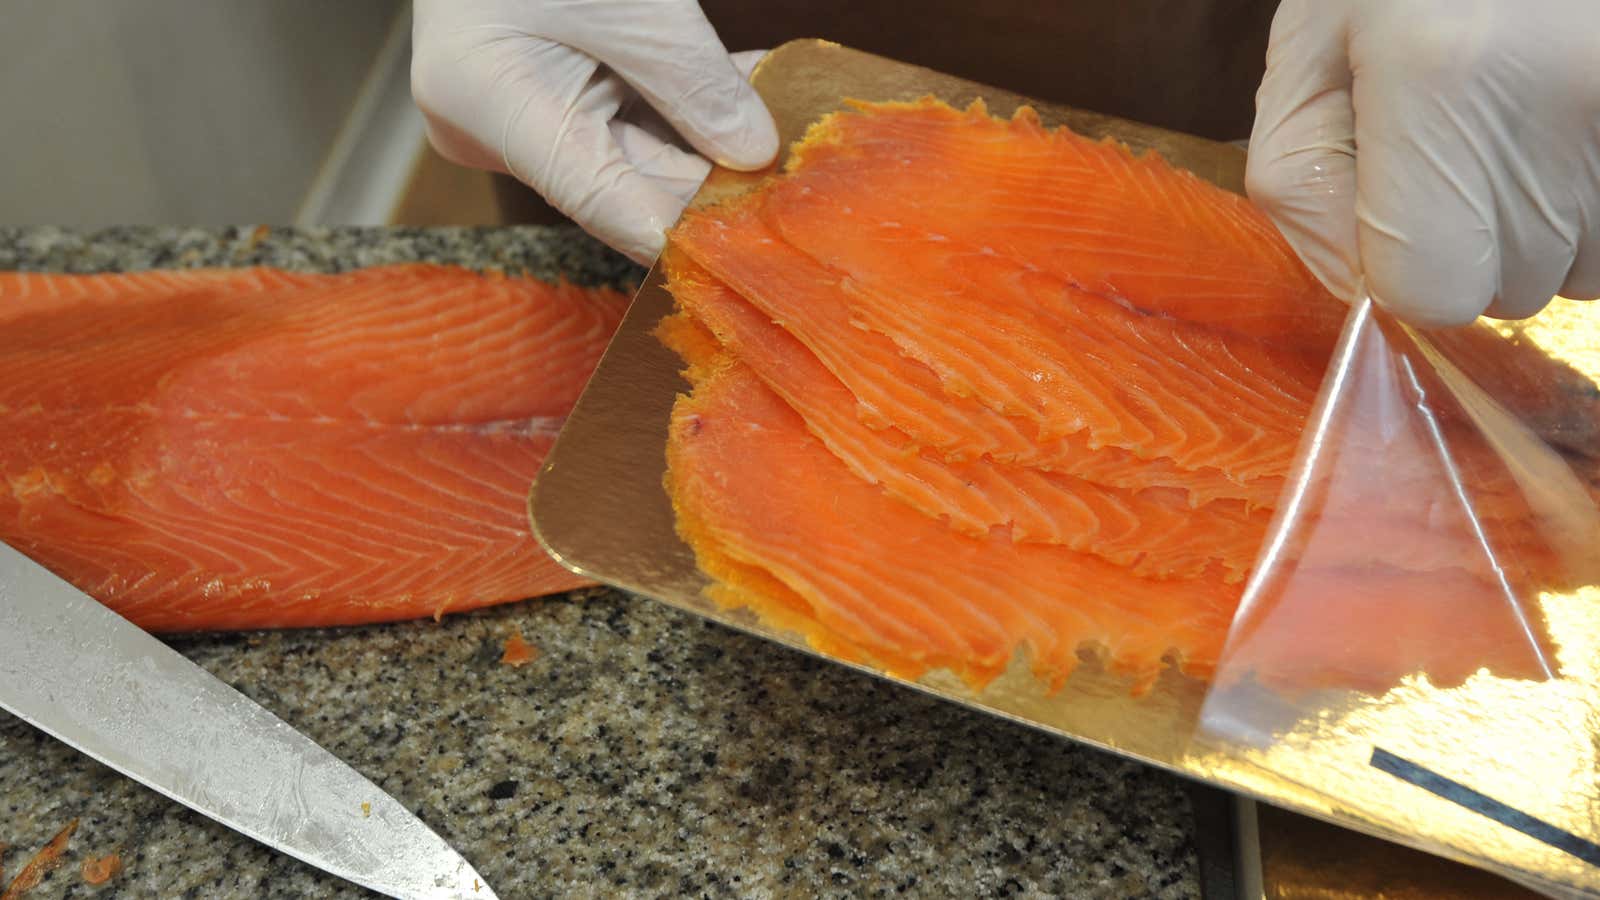 Most &quot;lox&quot; is actually smoked salmon, rather than cured with salt. Whether it&#39;s fished or farmed is another matter.